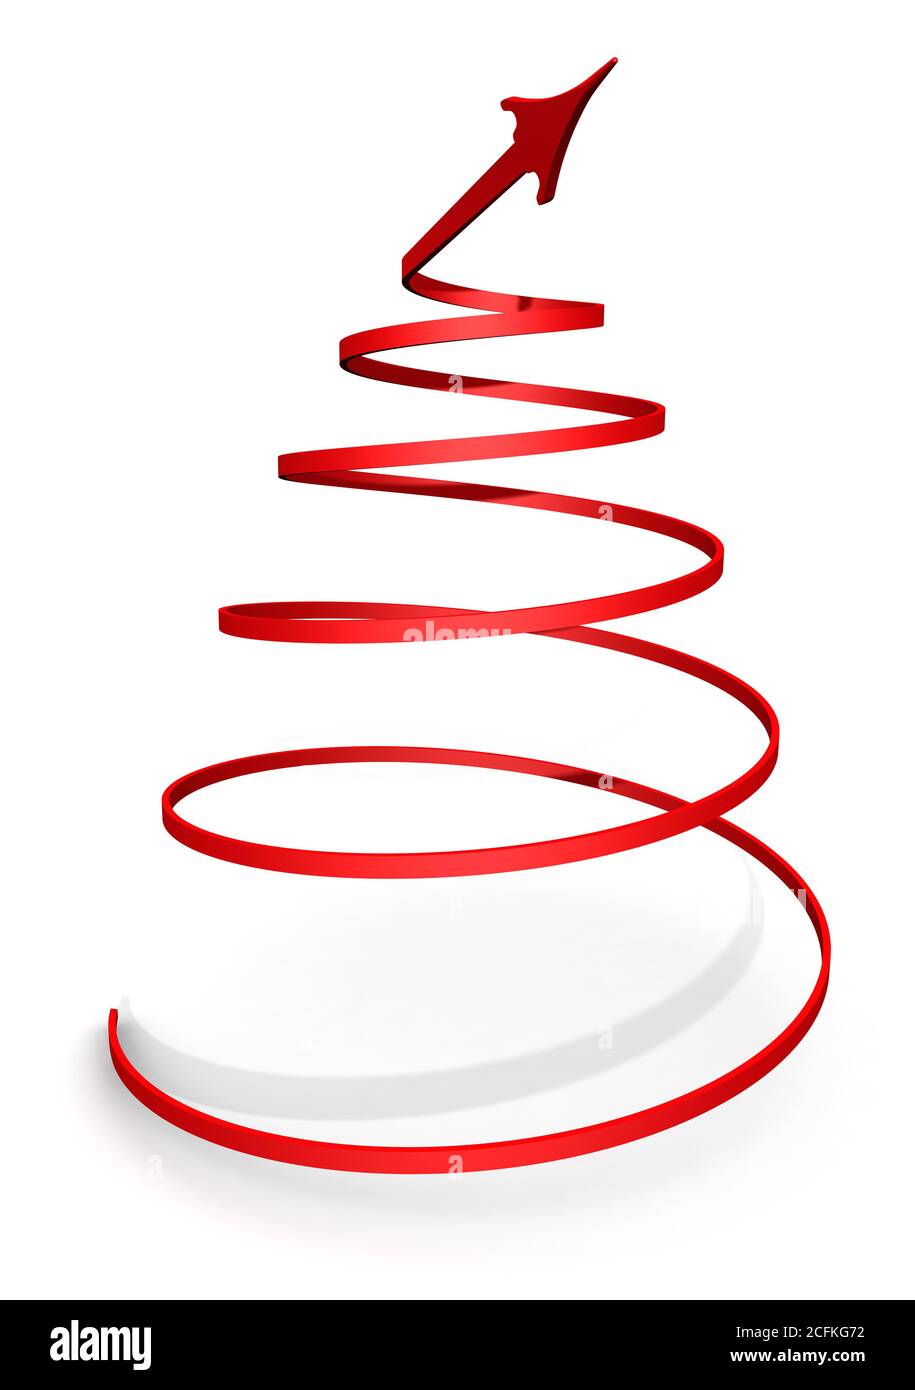 Red arrow twisted into a spiral. Growth chart Stock Photo